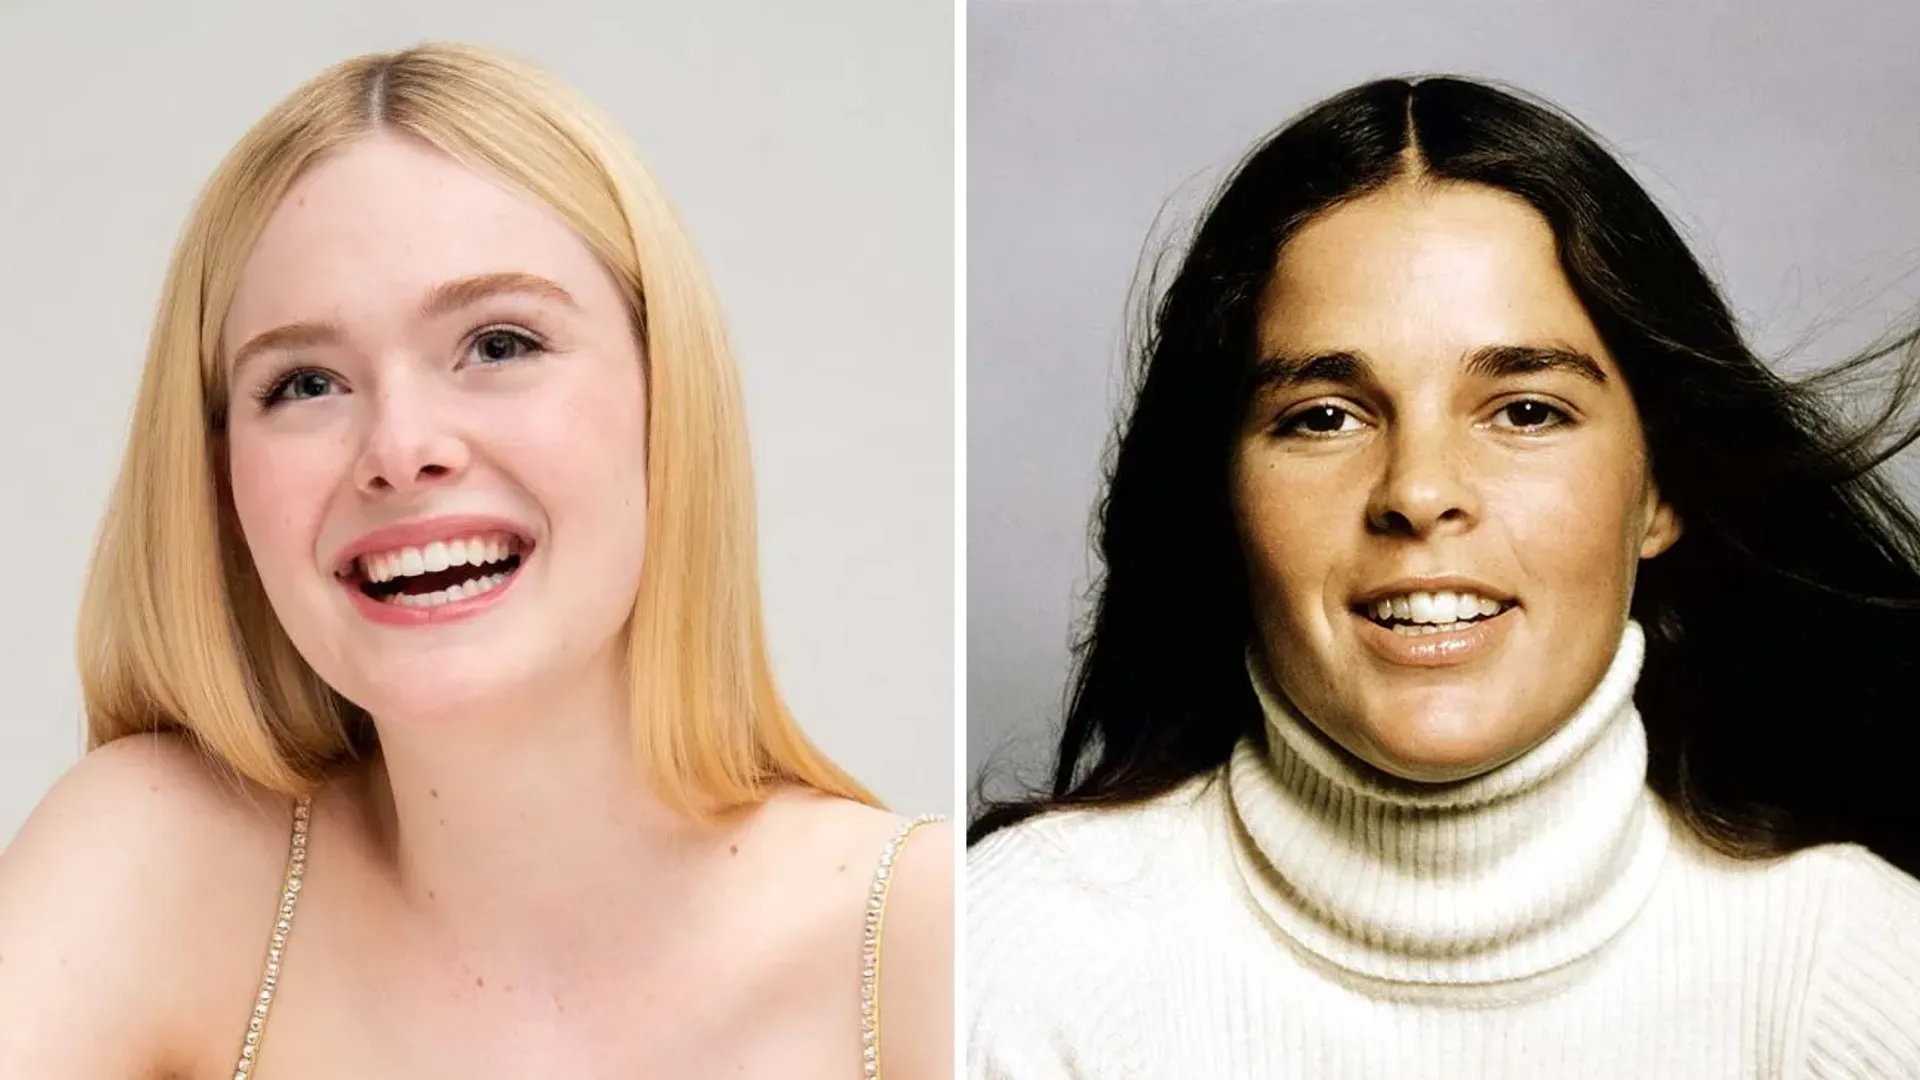 Elle Fanning got the role of Ali MacGraw